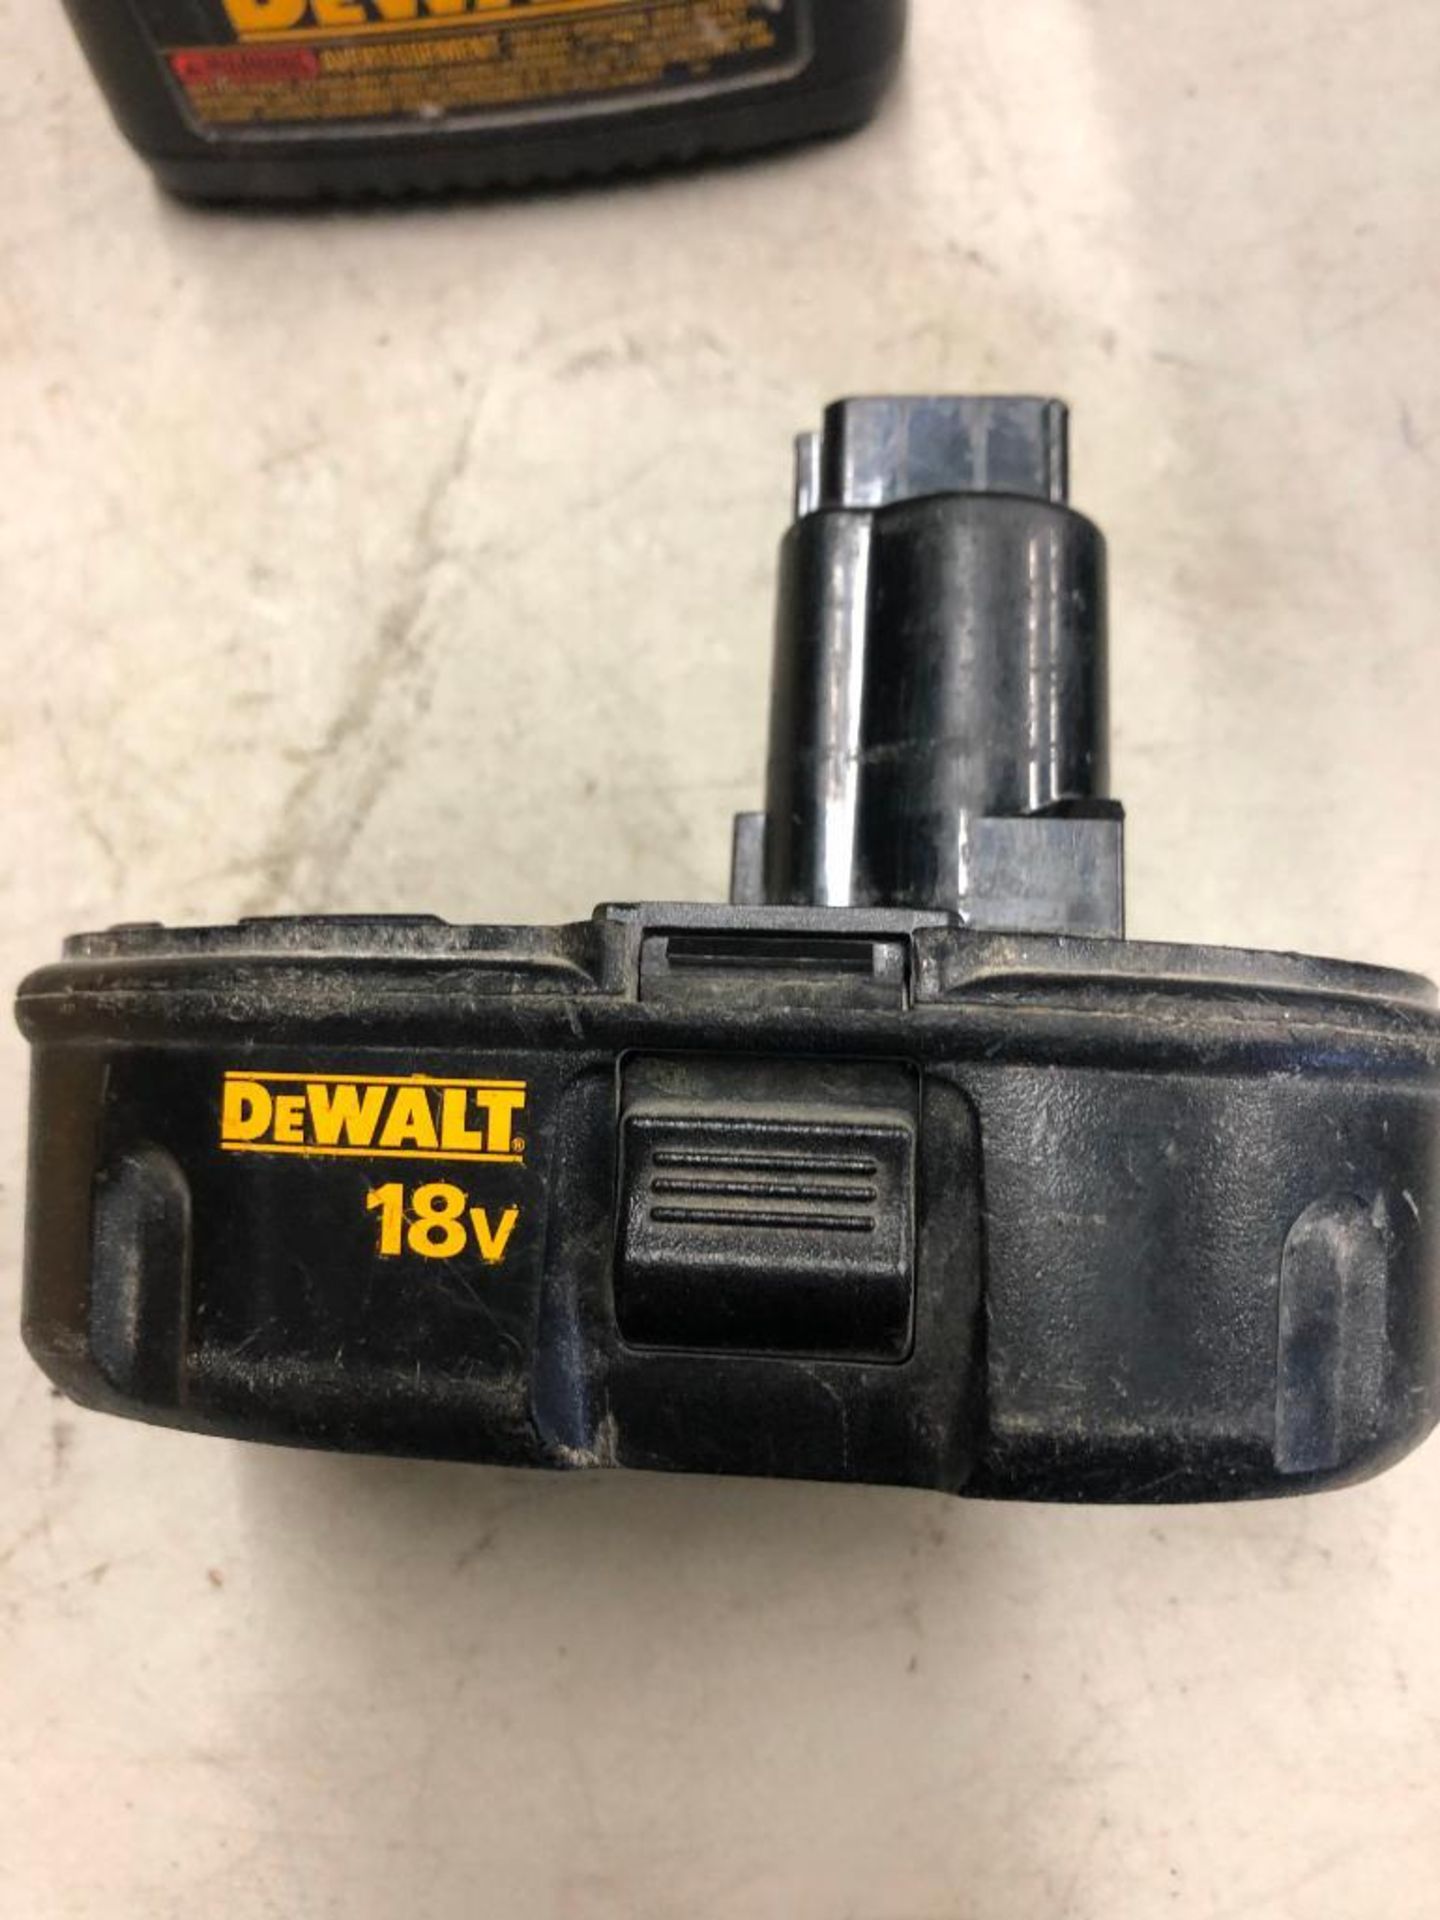 DEWALT CORDLESS 1/4'' HEAVY DUTY CUT-OFF TOOL, MODEL DC411, W/ (1) BATTERY AND CHARGER - Image 3 of 5